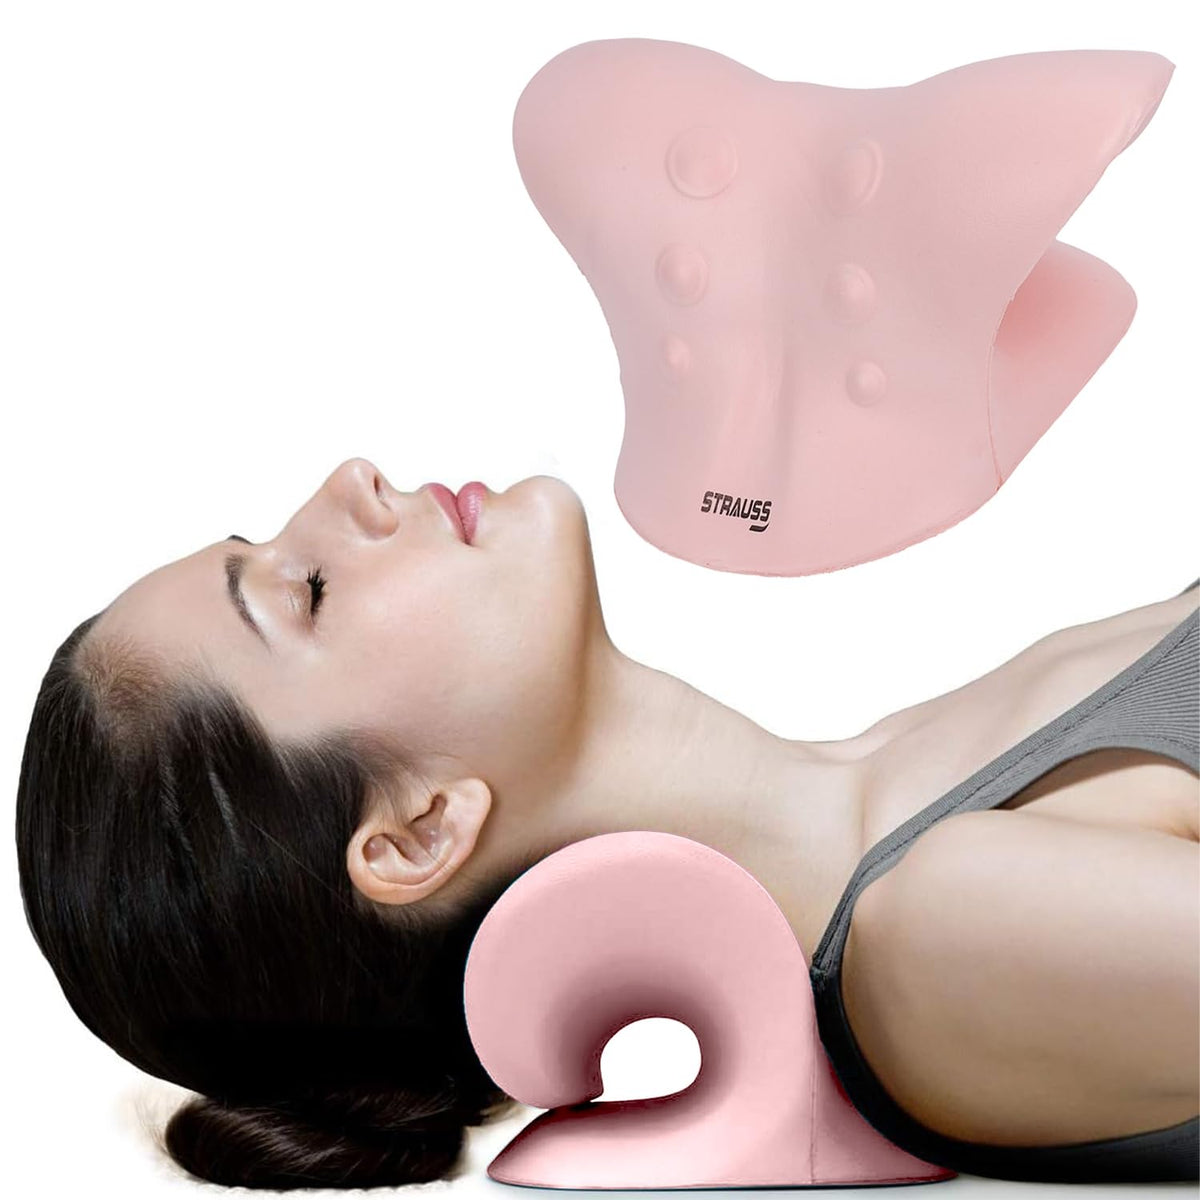 Strauss Neck Support Stretcher | Cervical Pillow | Cervical Traction Device for Relieve in Headache, Muscle Tension, Neck Pain, Shoulder Pain & Spine Alignment | Acupressure Chiropractic Pillow,(Pink)